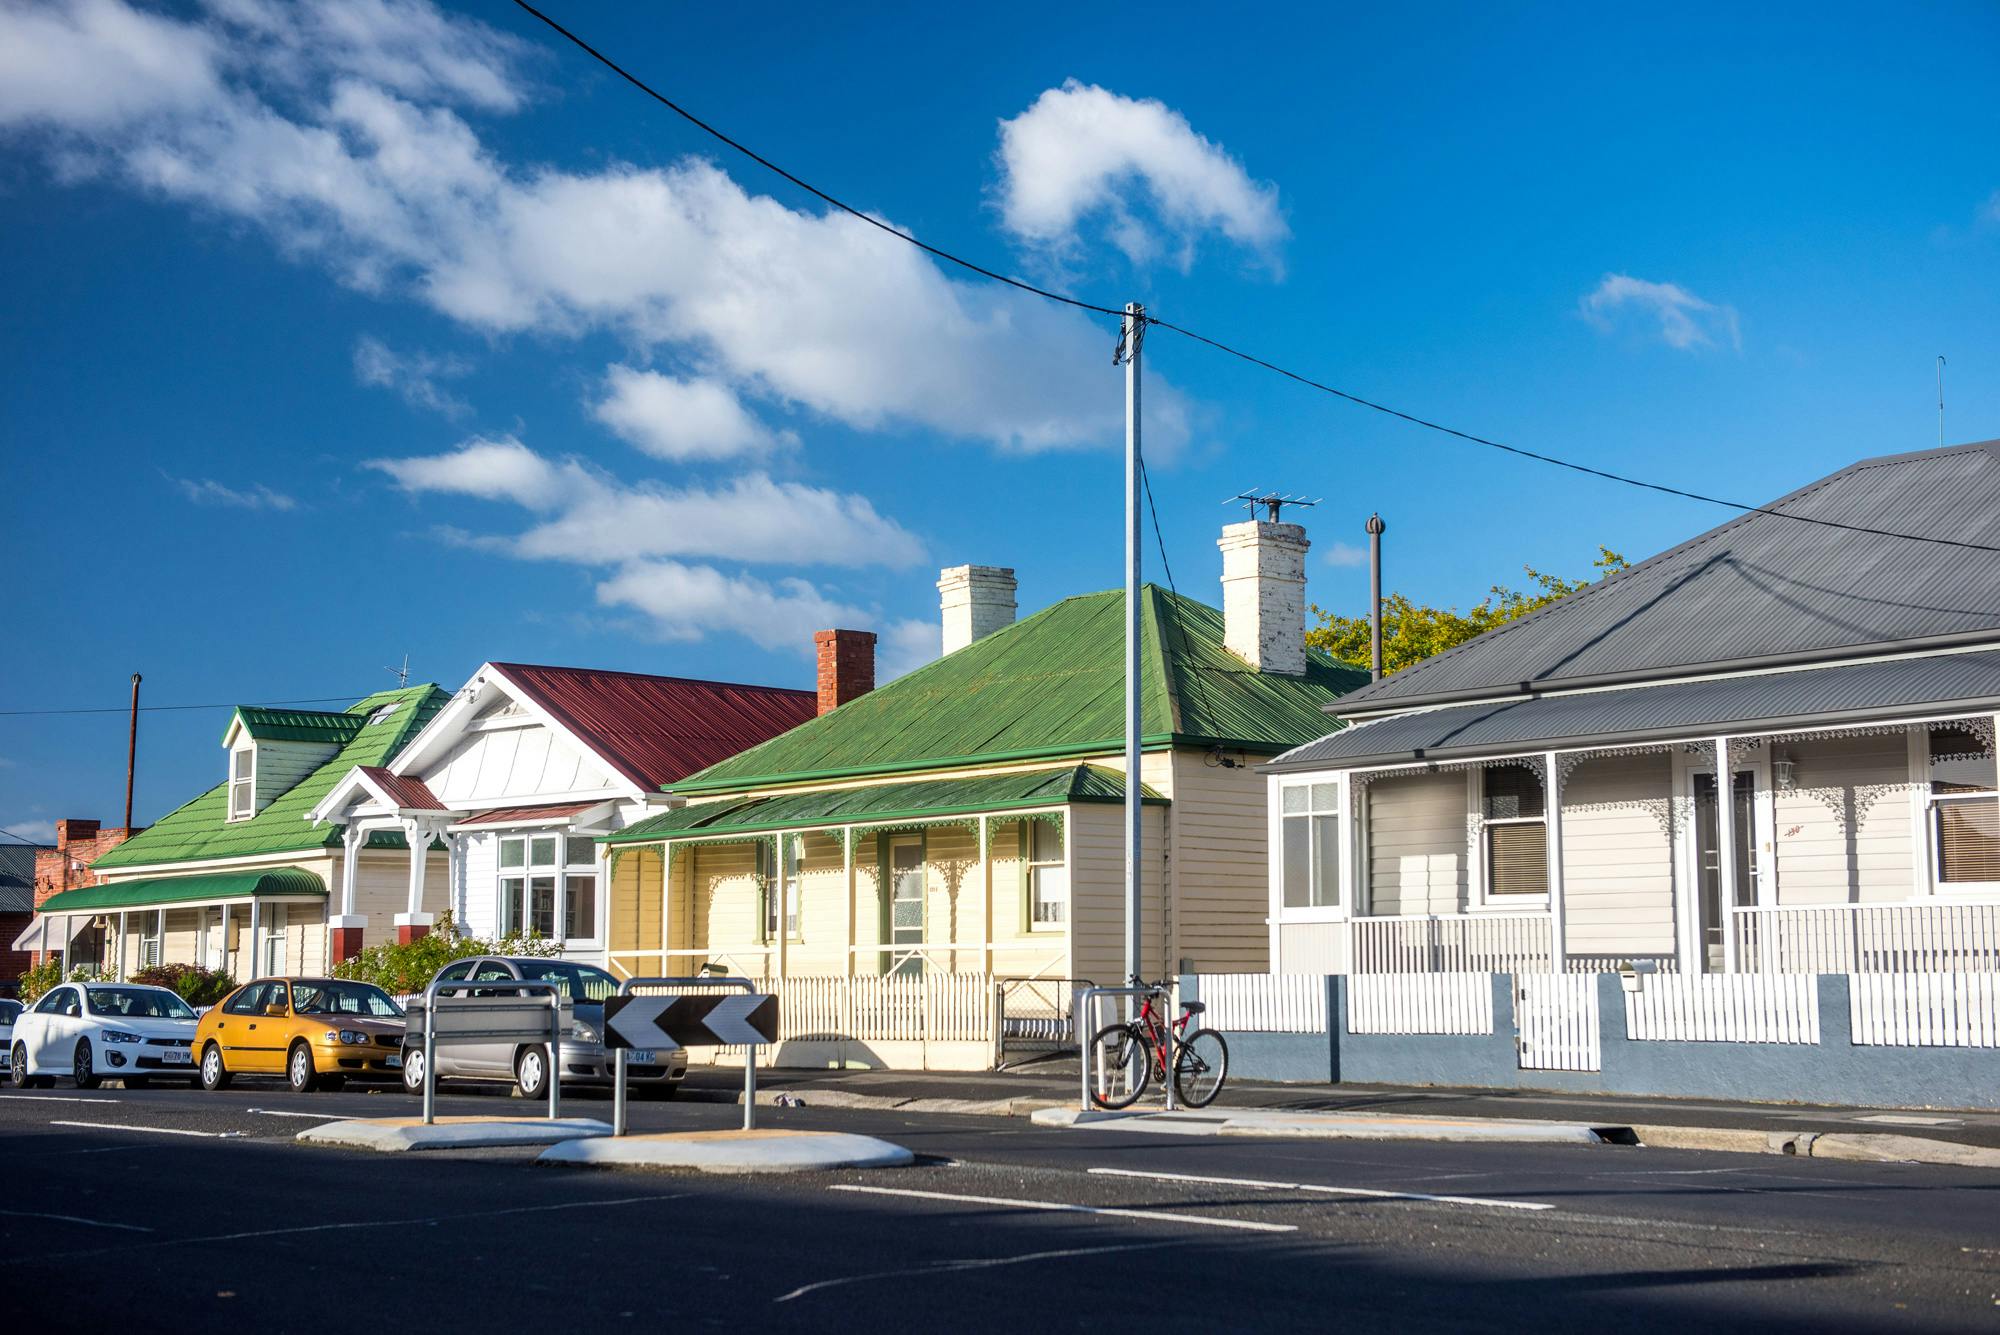 View from the street of a row of weatherboard houses